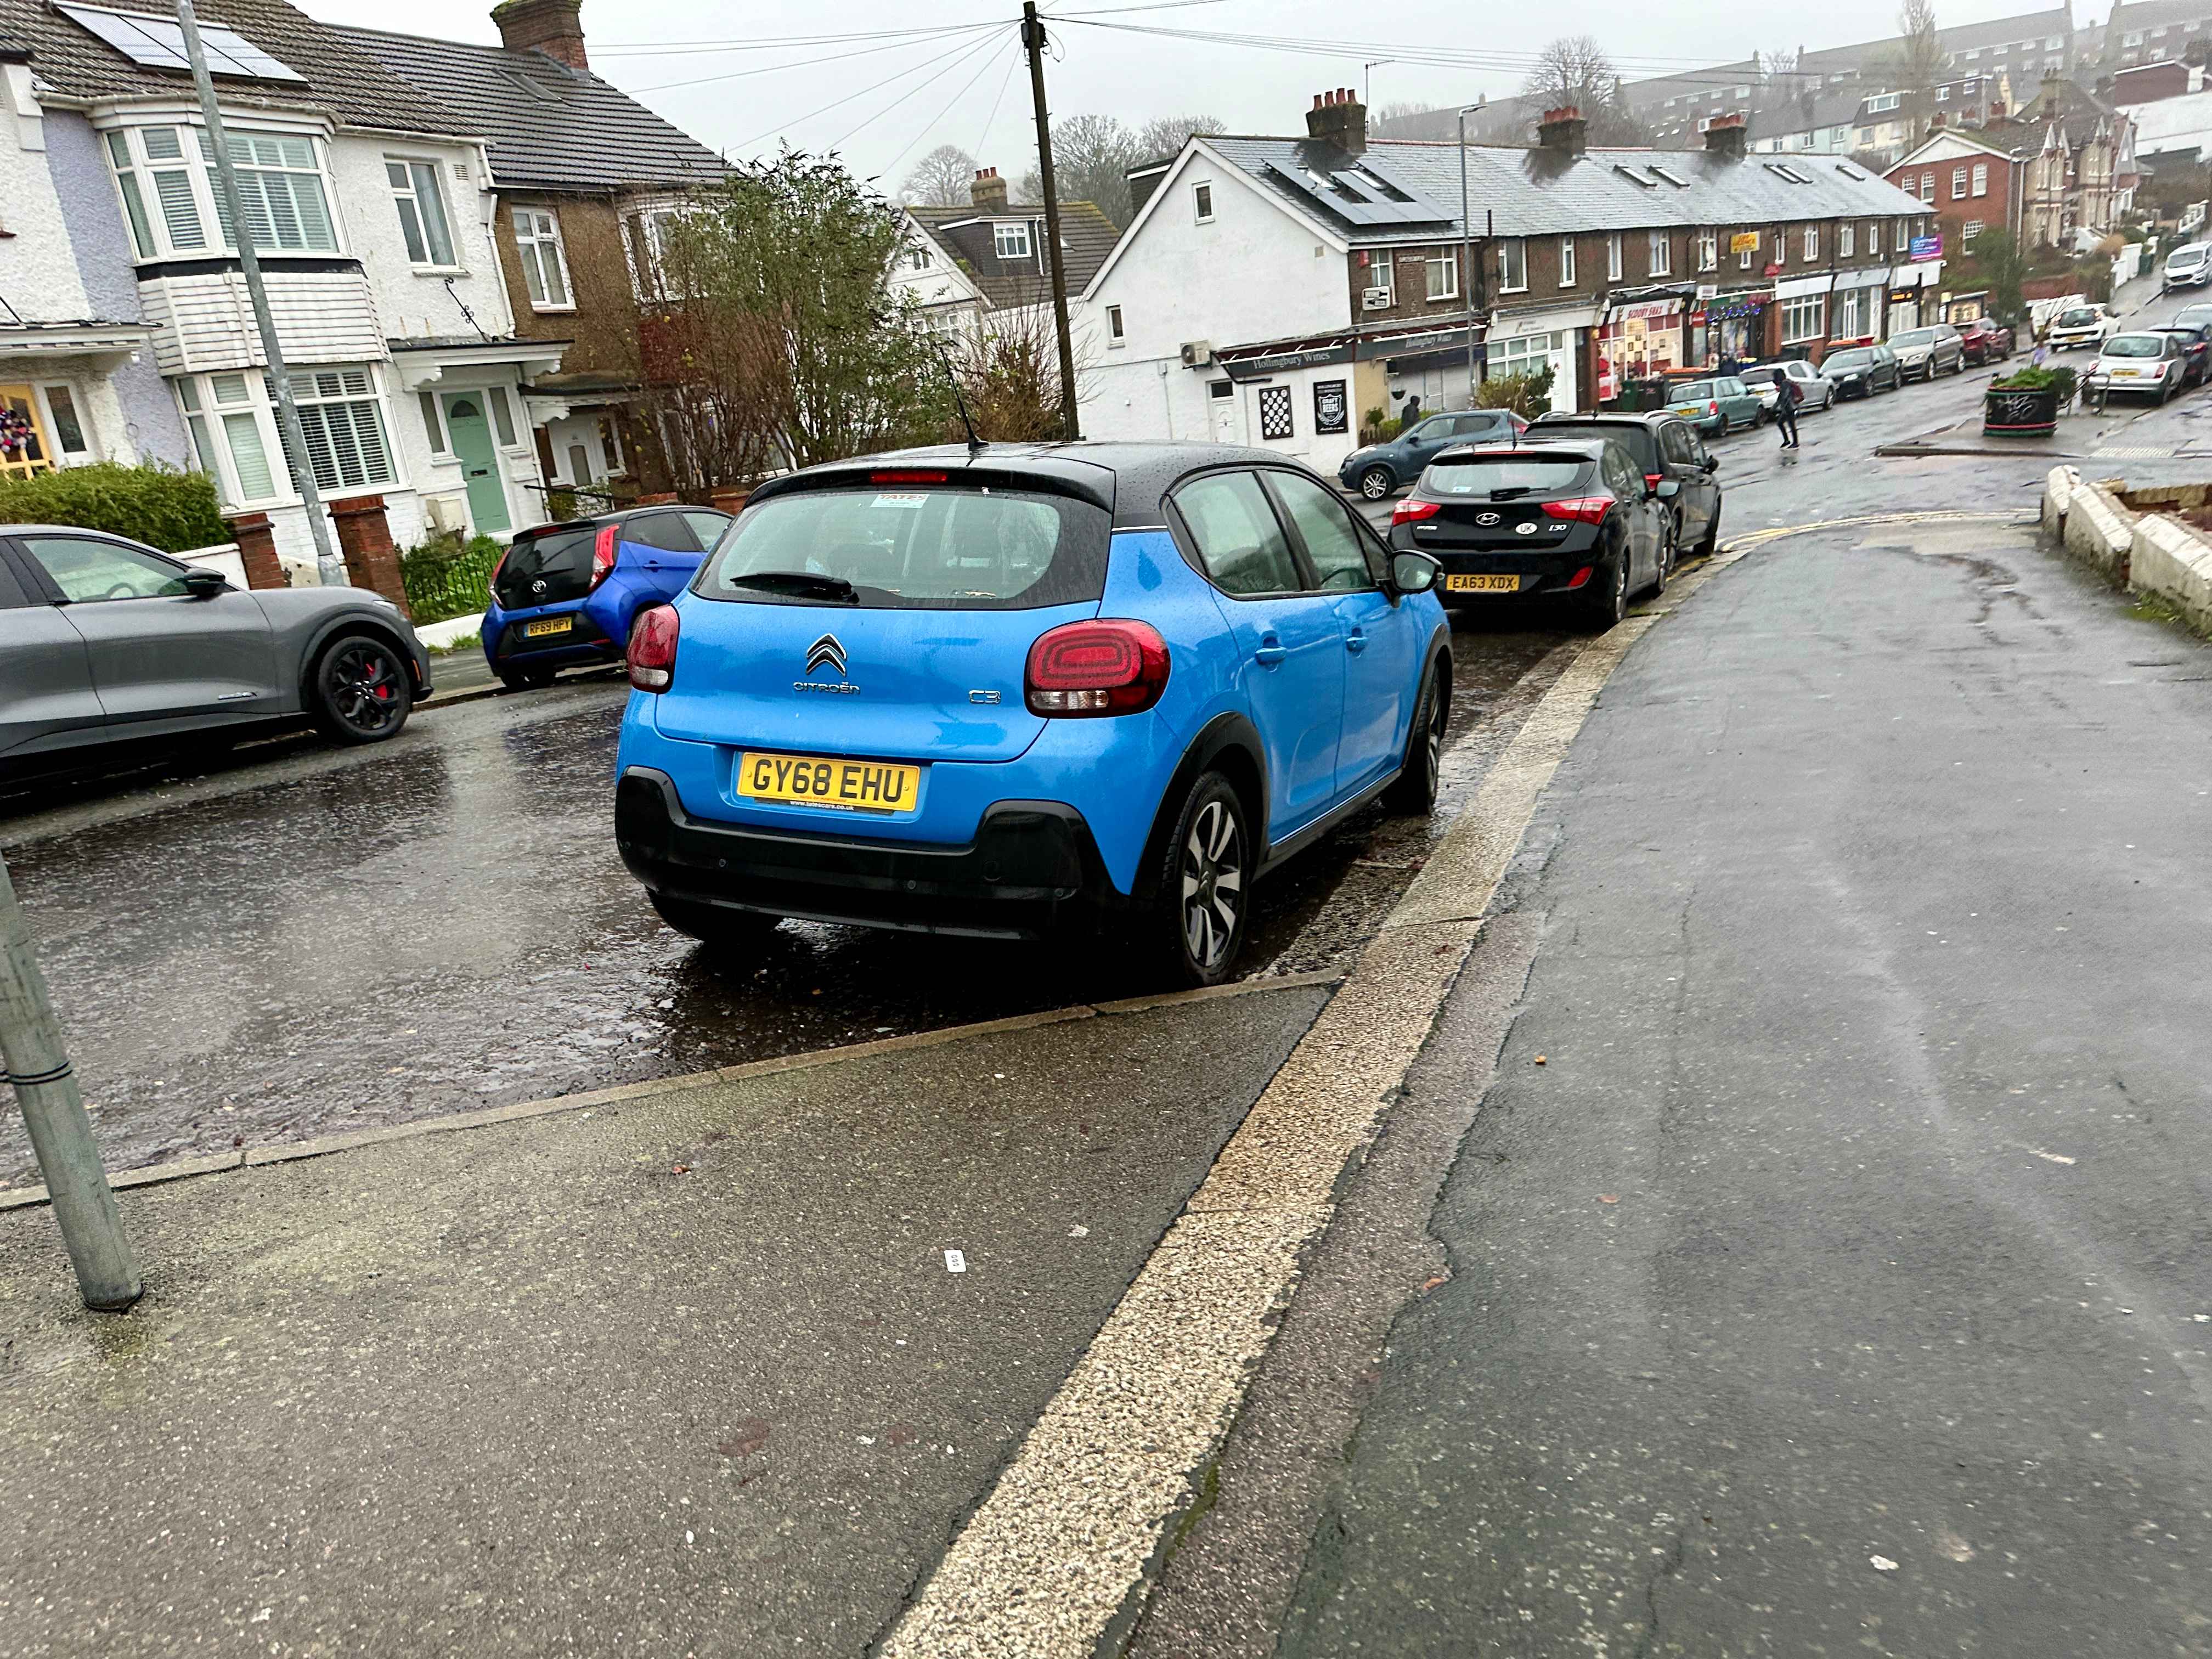 Photograph of GY68 EHU - a Blue Citroen C3 parked in Hollingdean by a non-resident who uses the local area as part of their Brighton commute. The eleventh of twelve photographs supplied by the residents of Hollingdean.